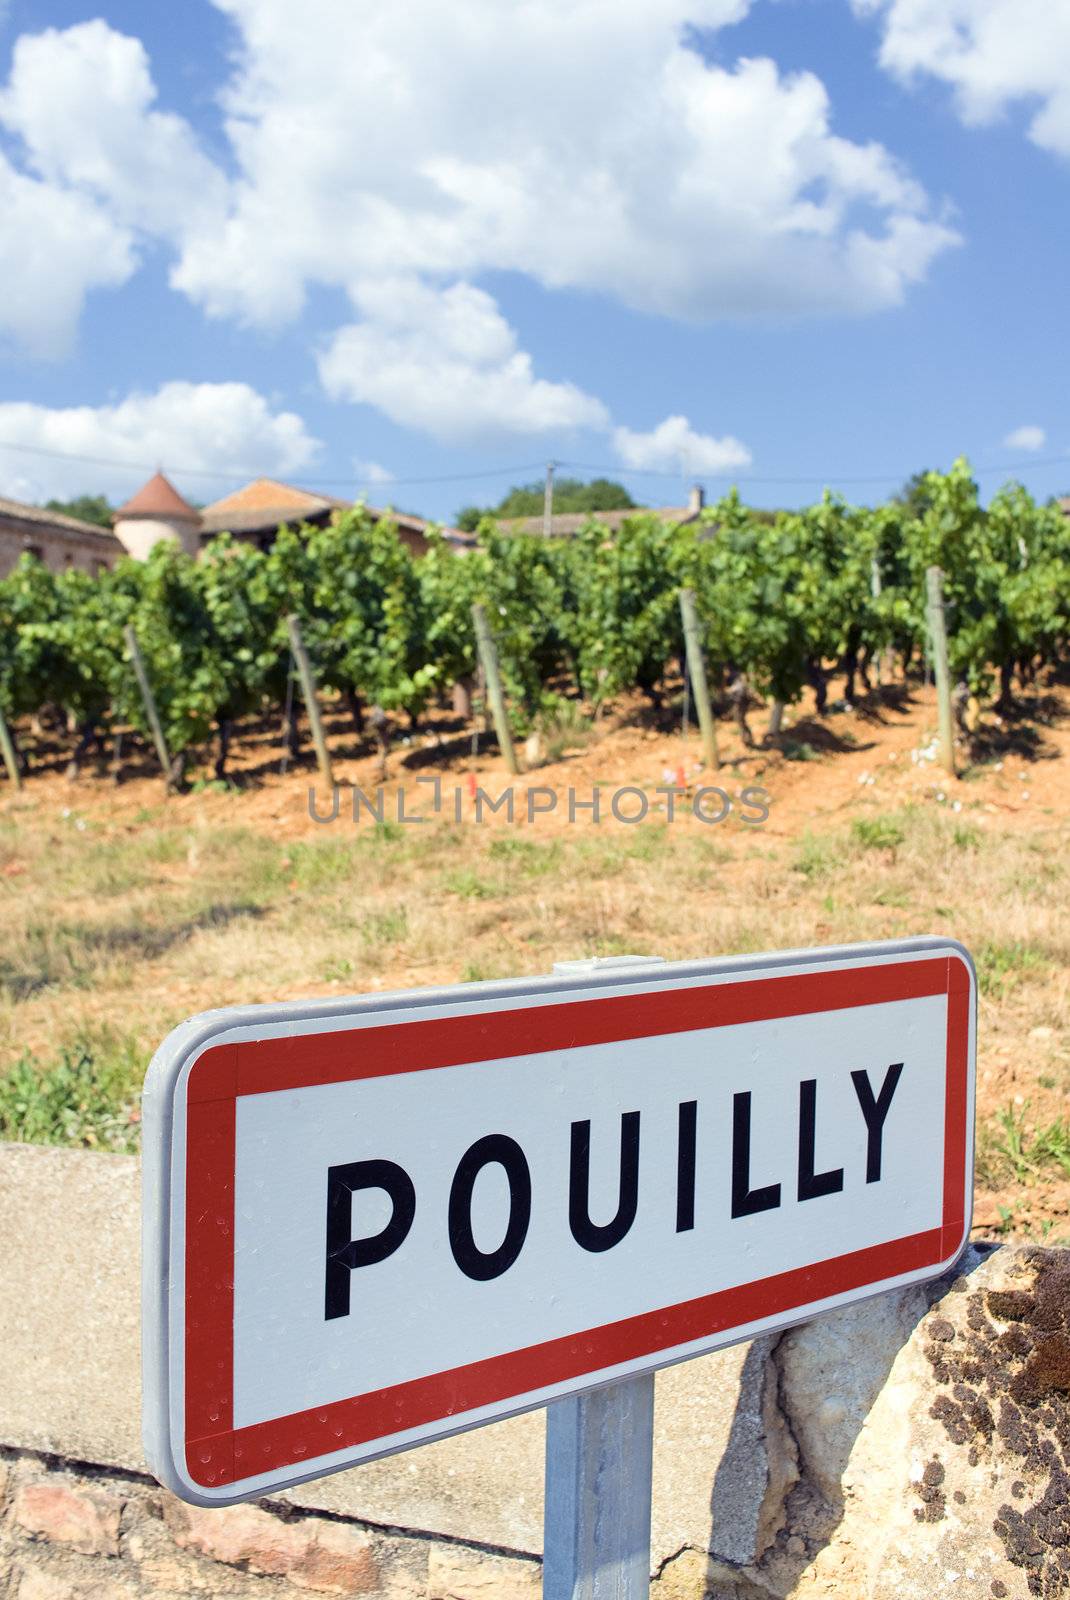 Pouilly, a famous french city with wine agriculture